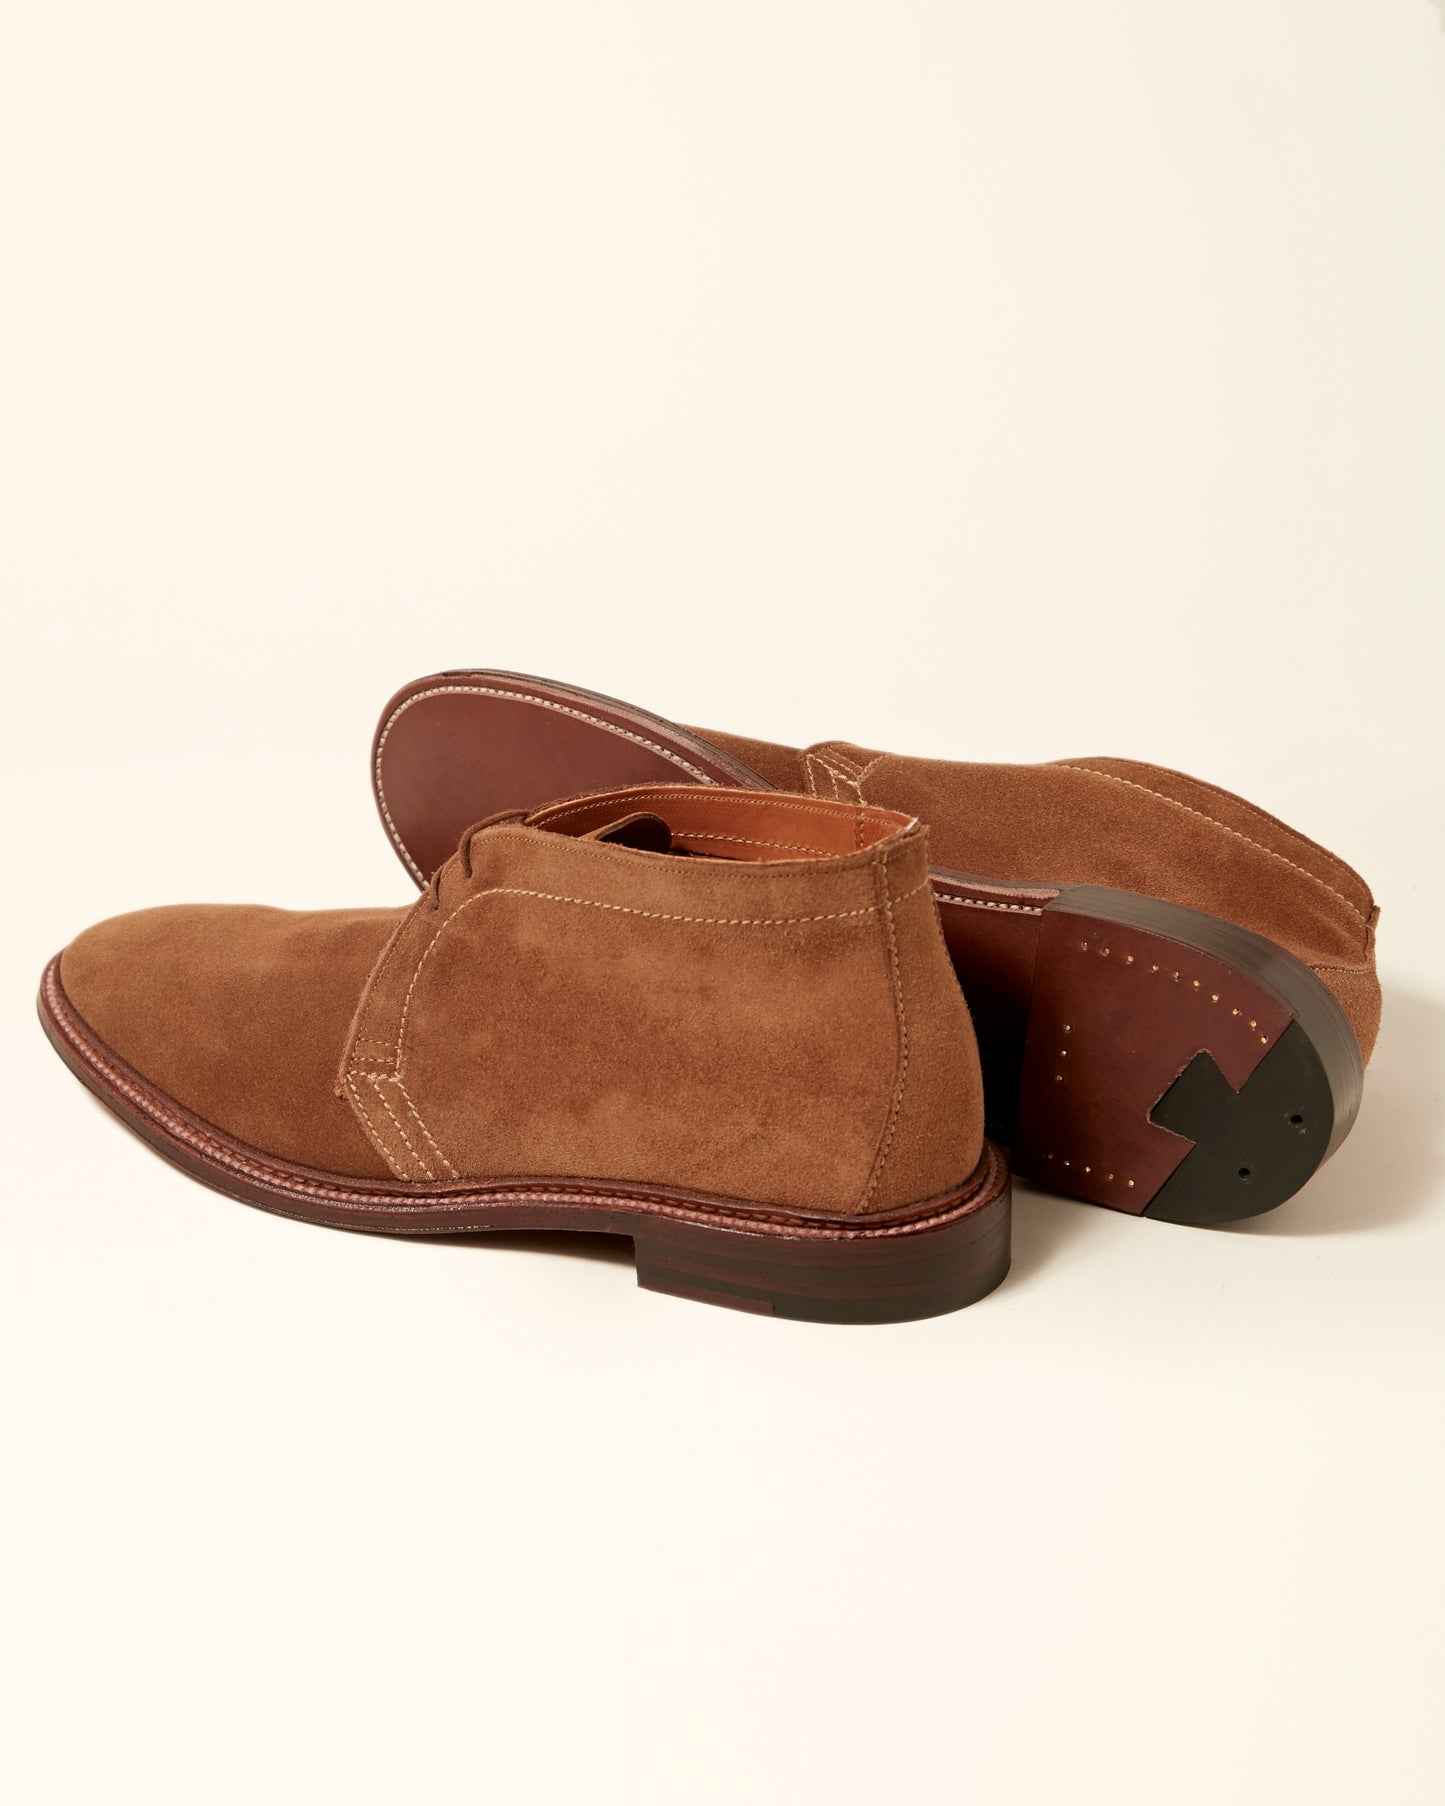 1493 Snuff Suede Unlined Chukka Boot